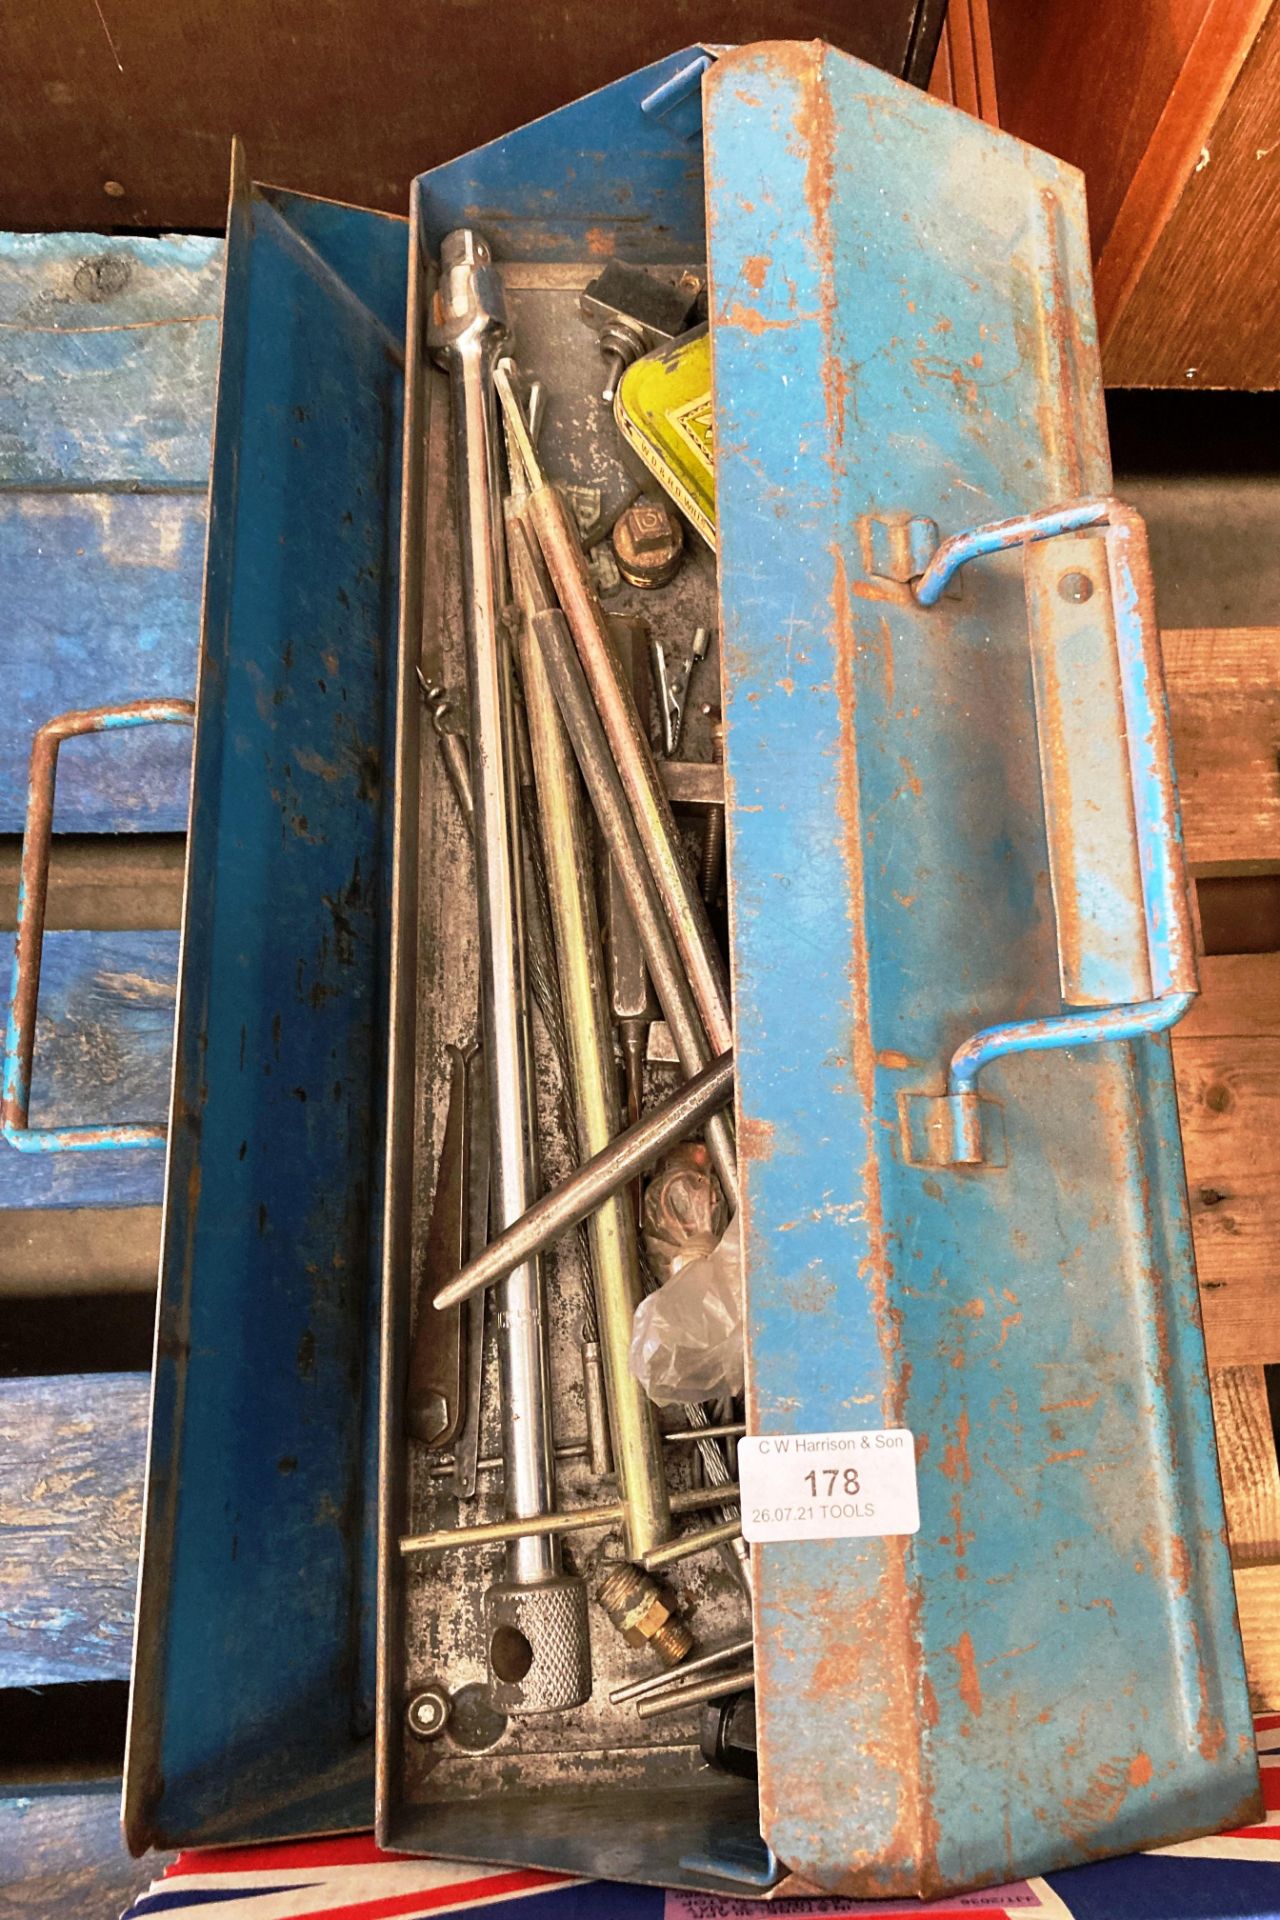 Blue metal cantilever tool box and contents - assorted tools - spanners,